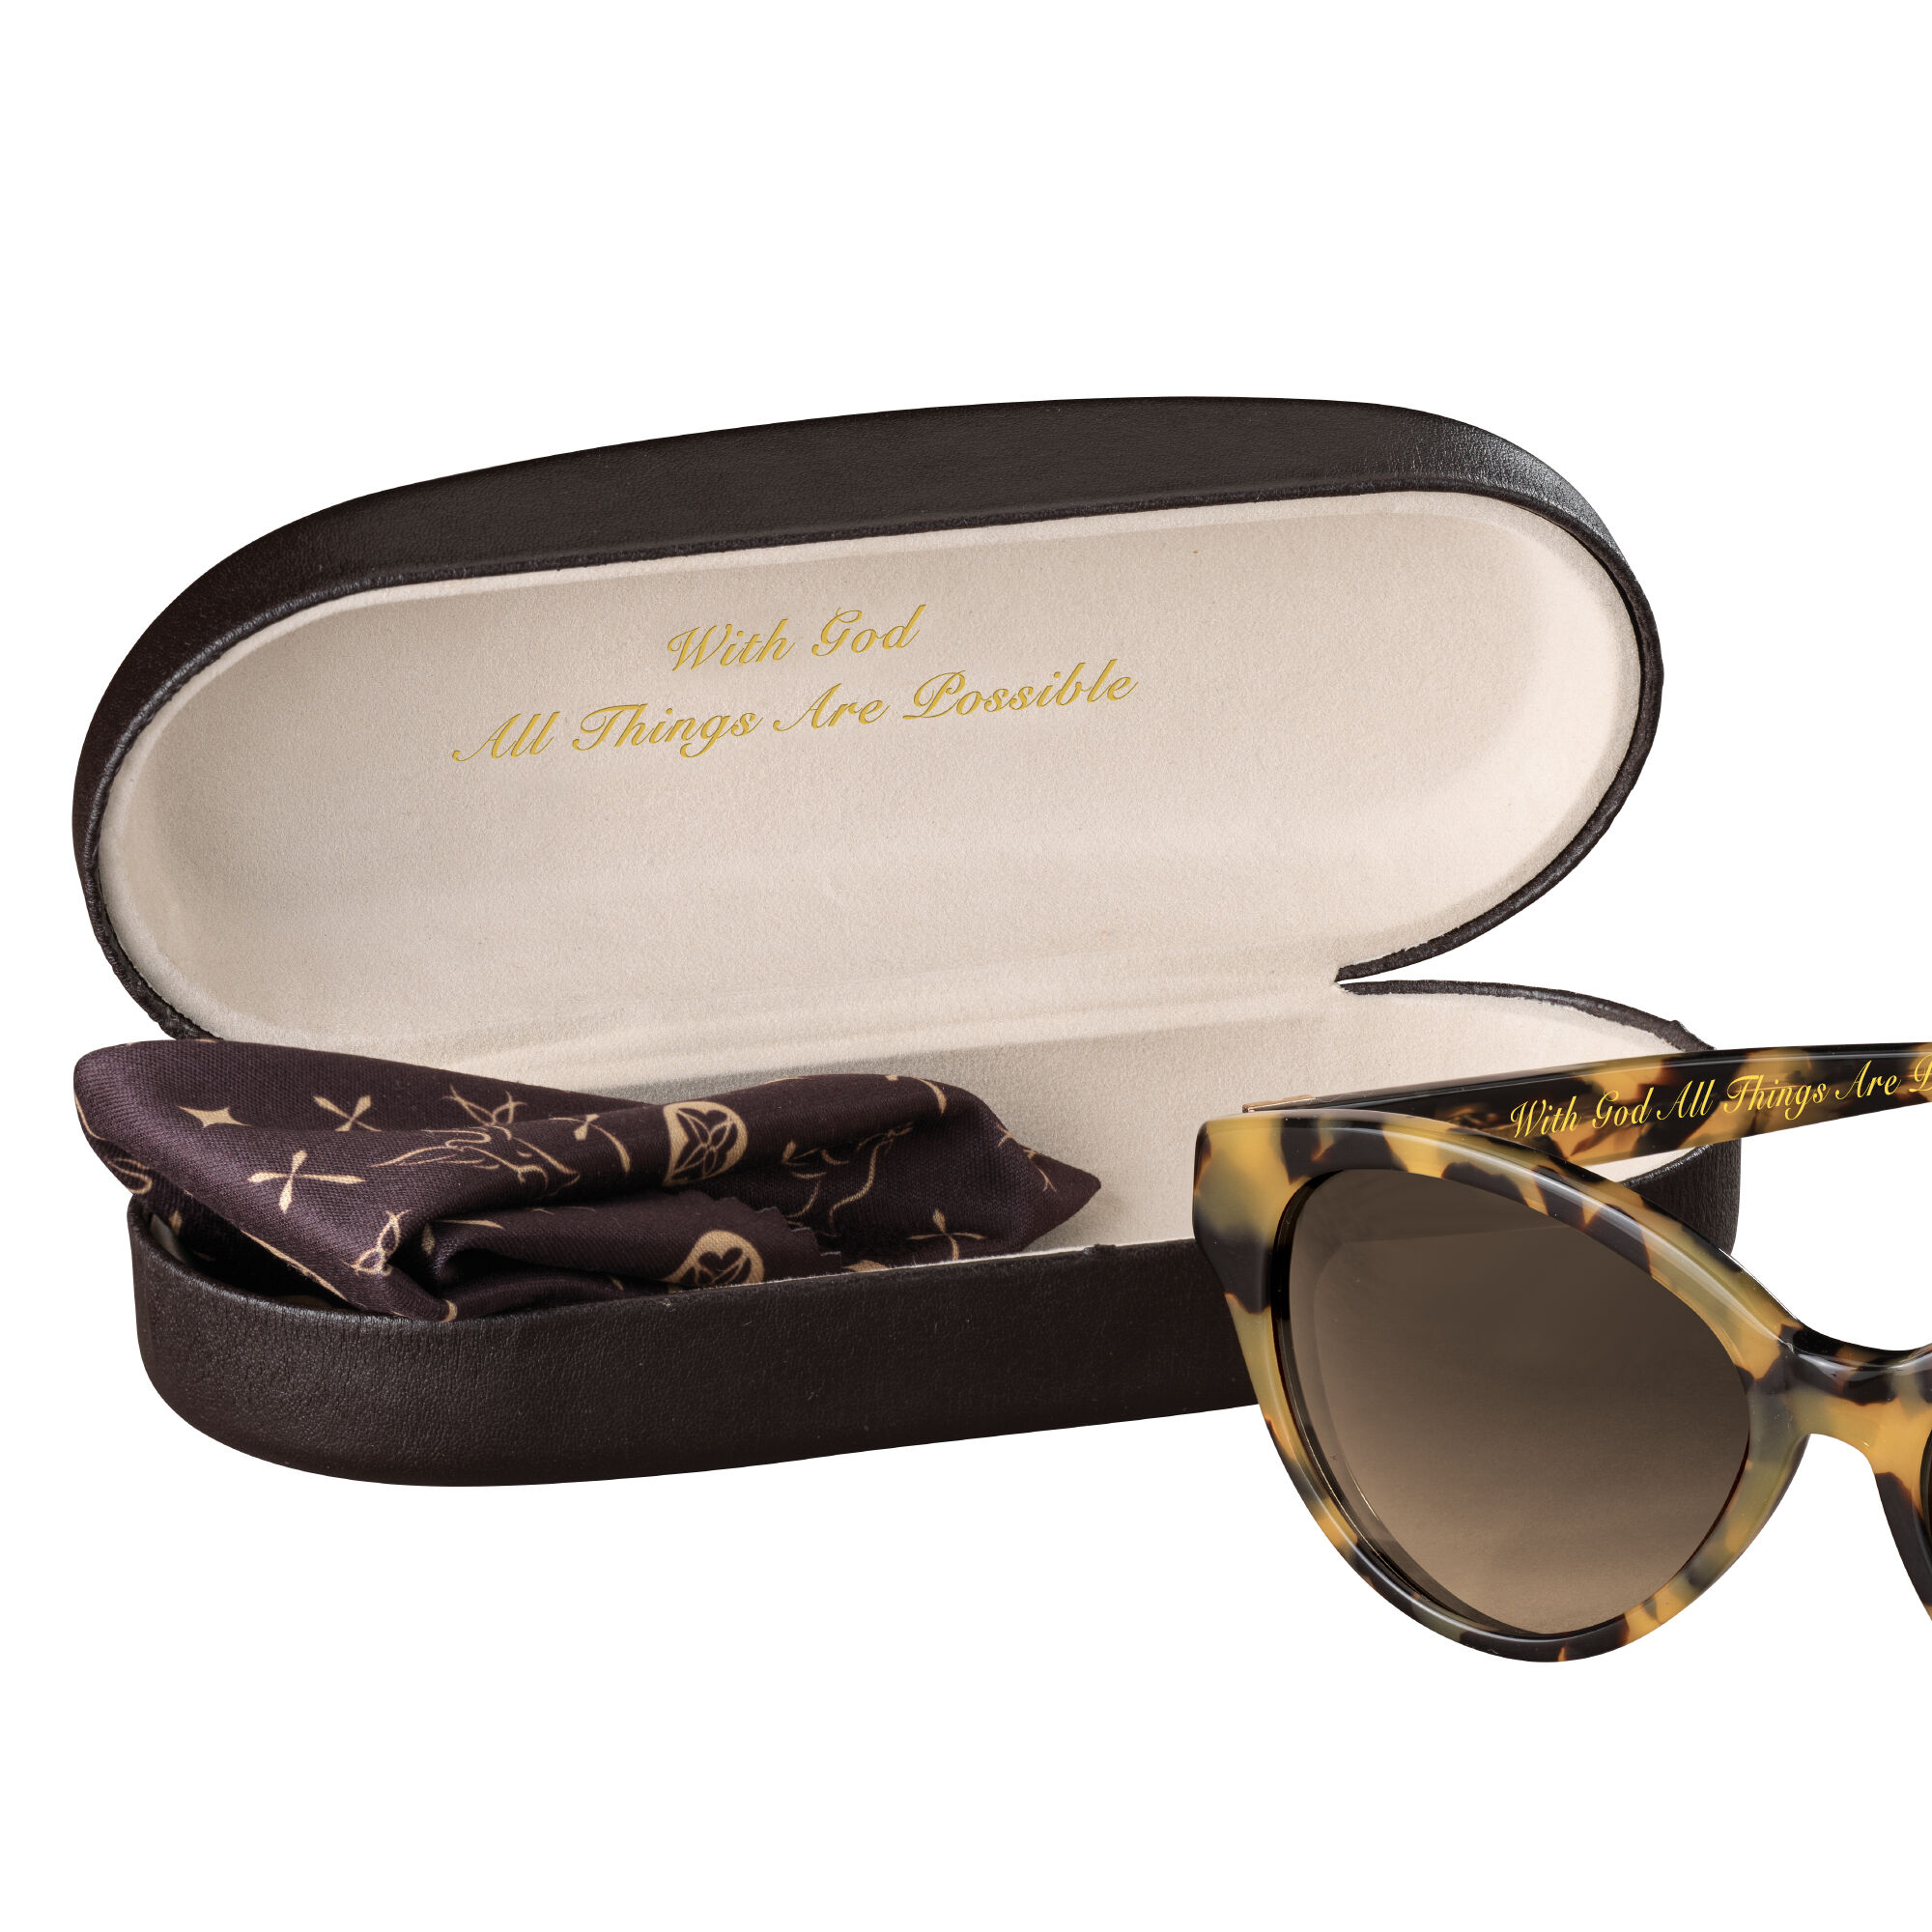 With God All Things Are Possible Sunglasses and Personalized Case 10348 0018 c box